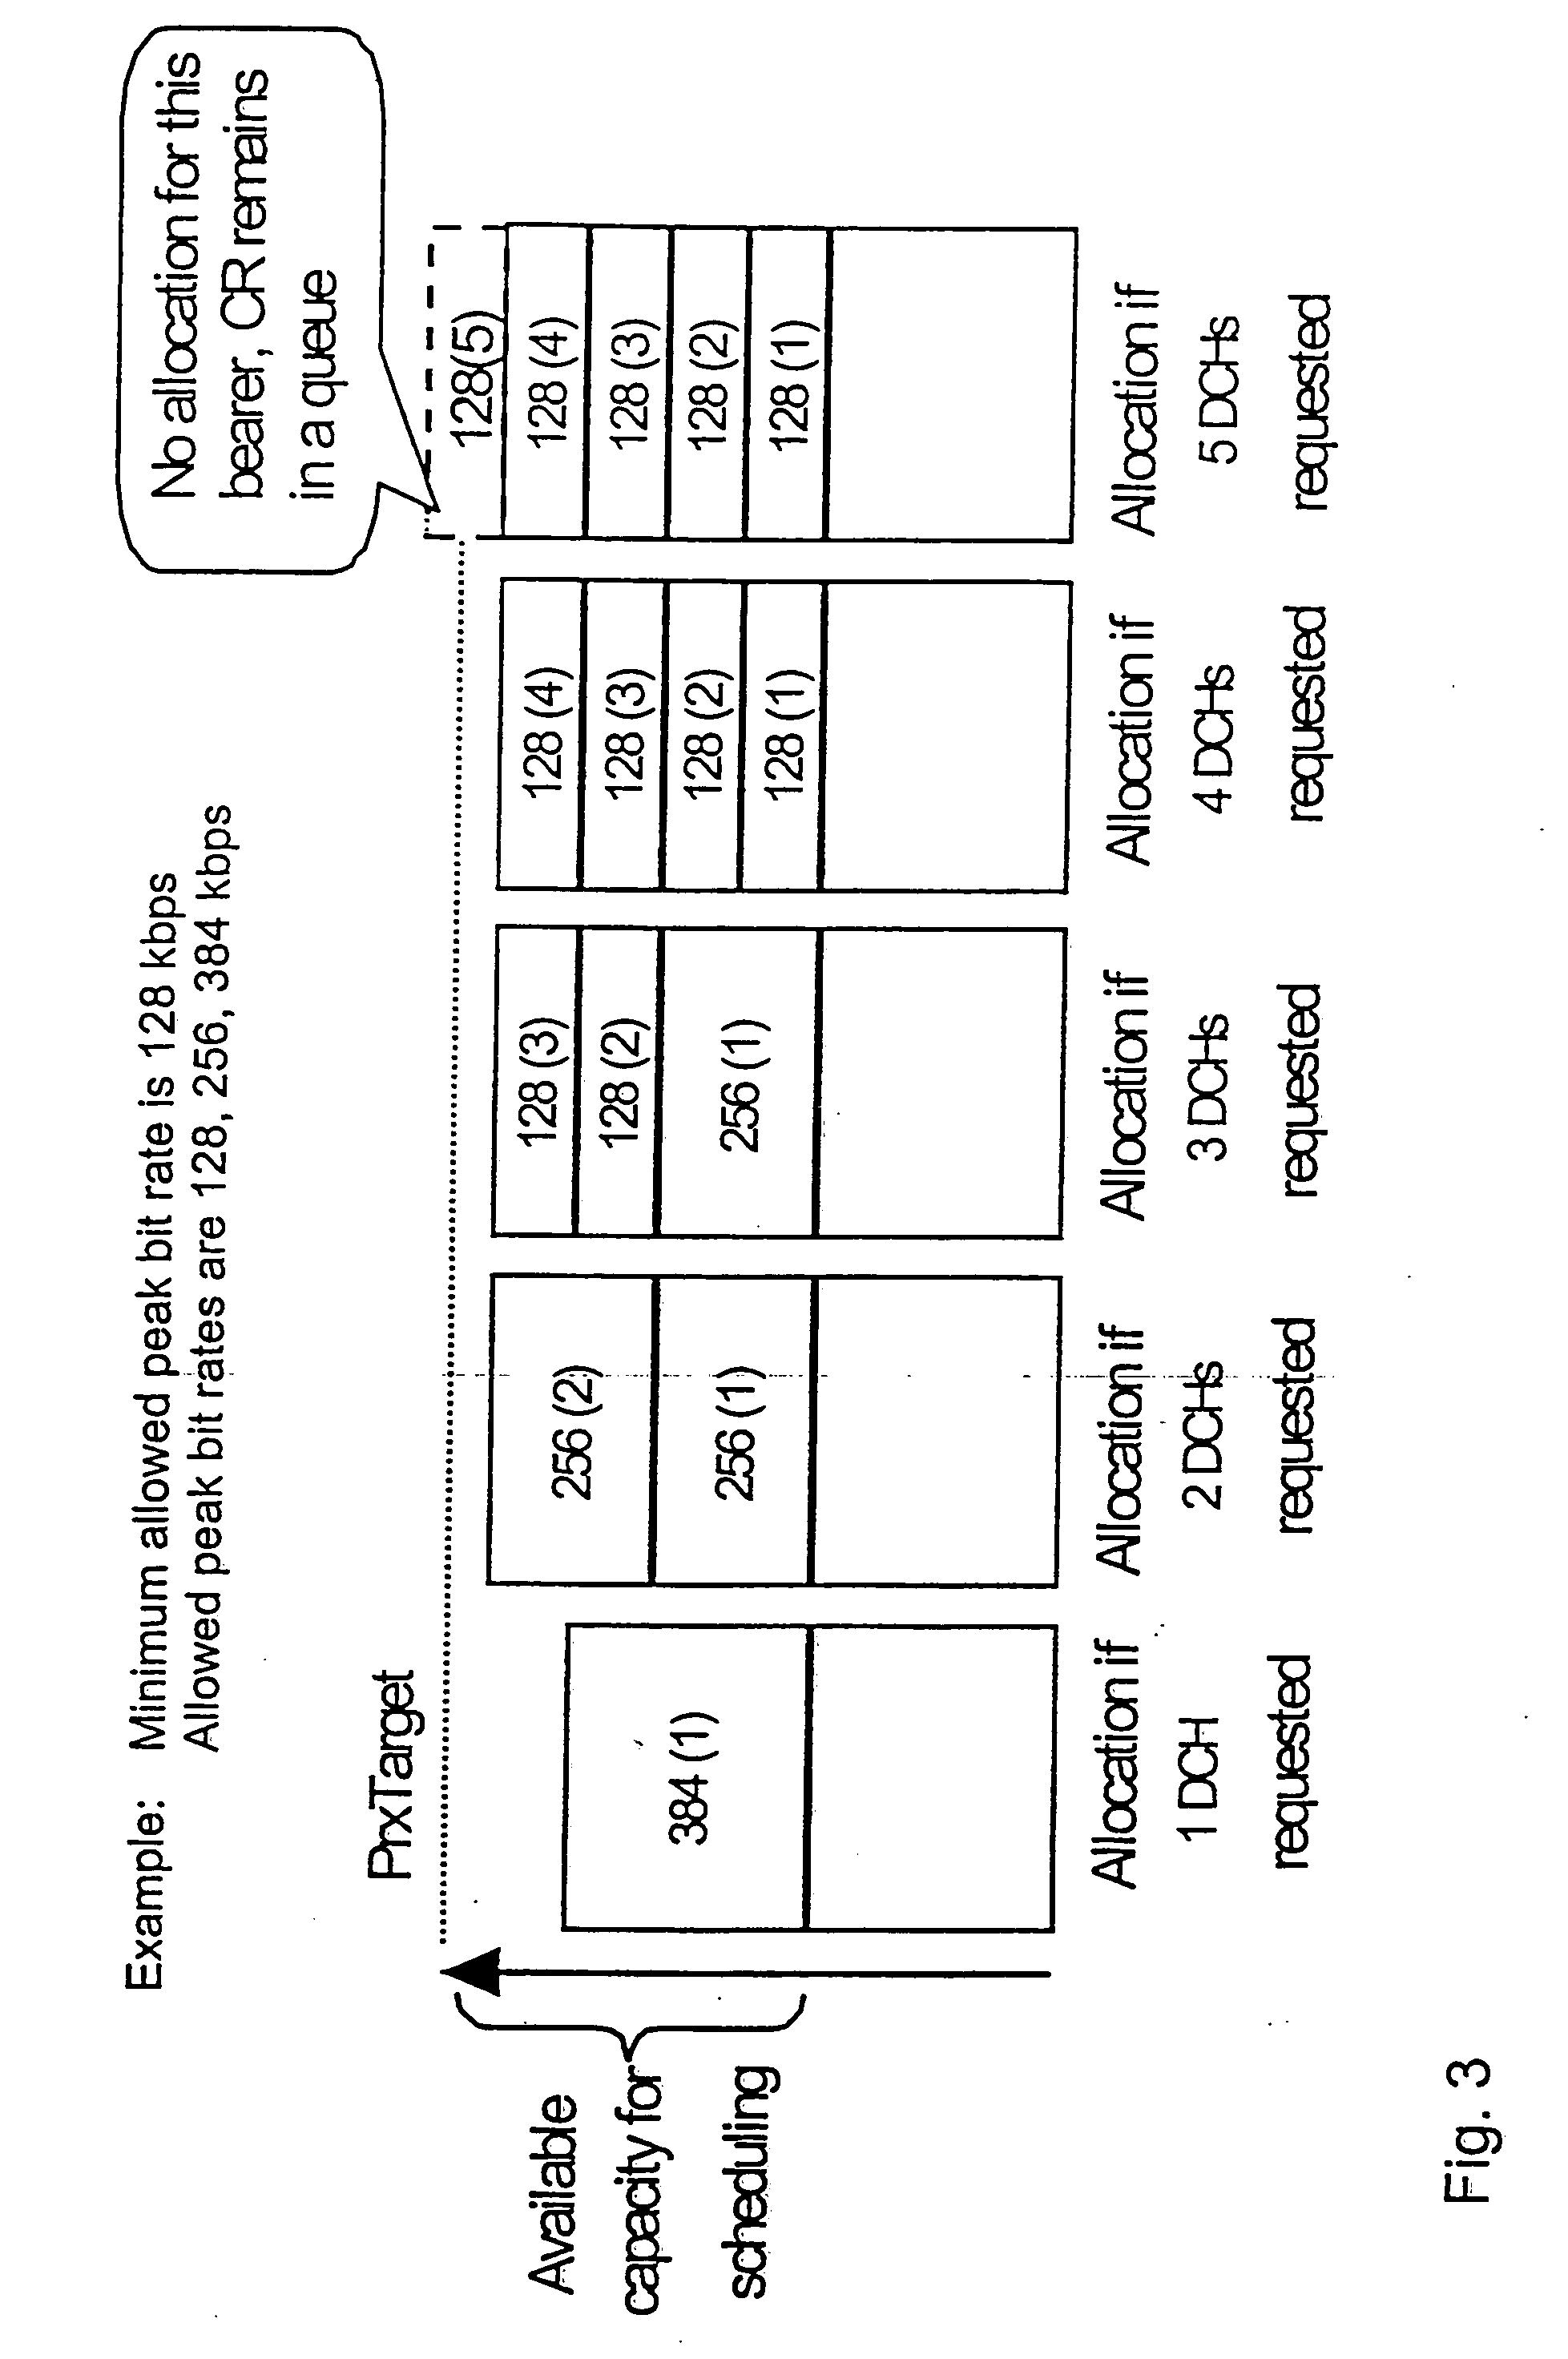 Capacity allocation for packet data bearers